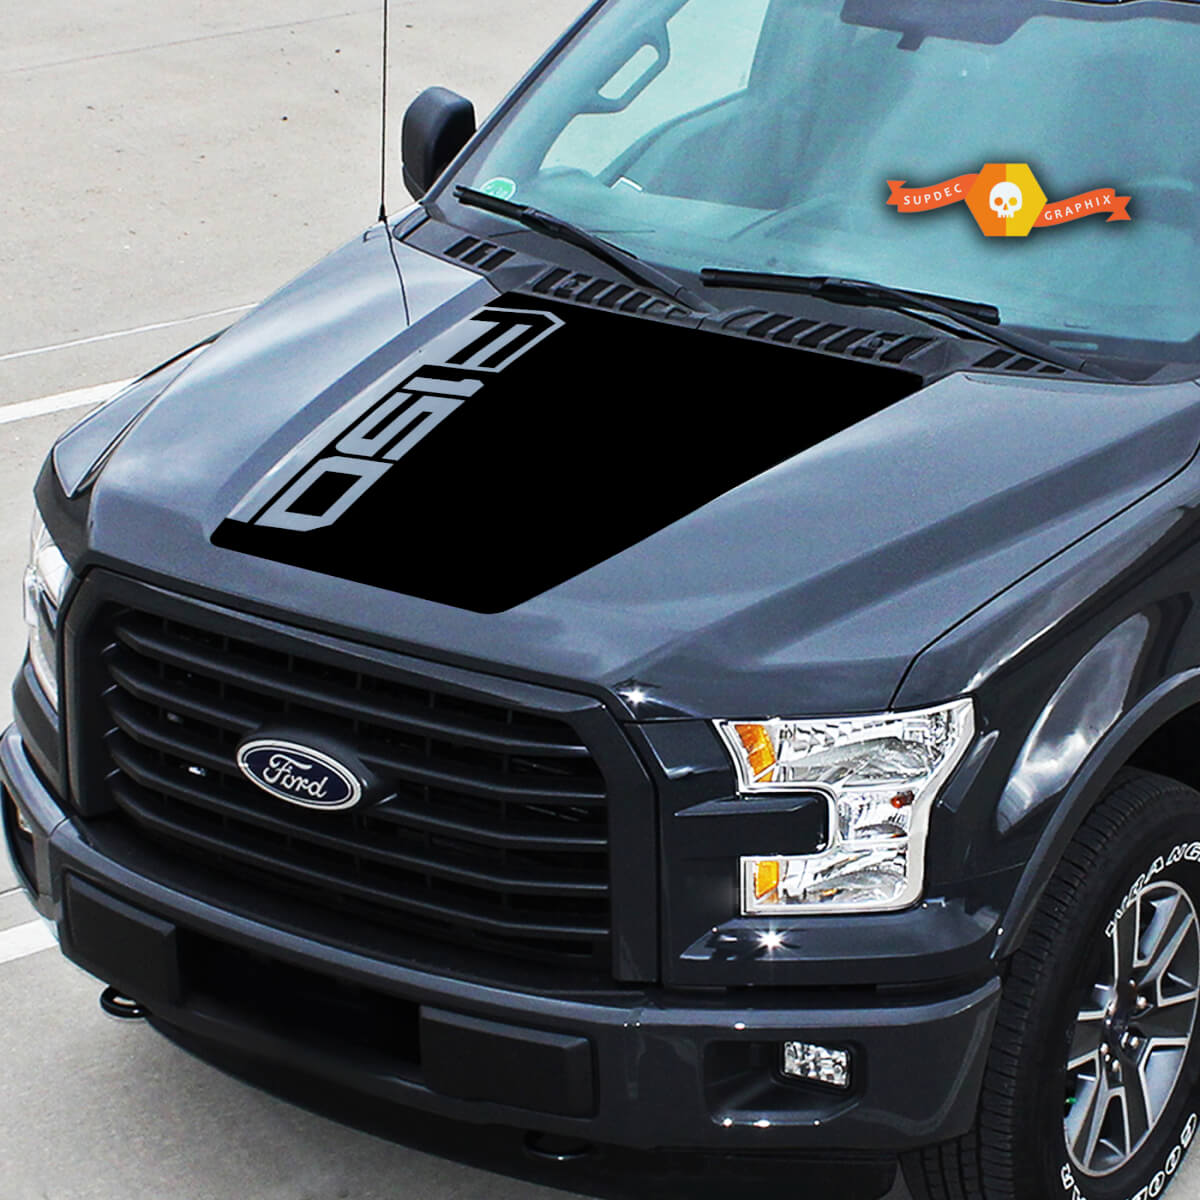 Fits Ford F-150 One Side Logo EcoBoost Center Hood Graphics Stripes Vinyl Decals Truck Stickers 15-20